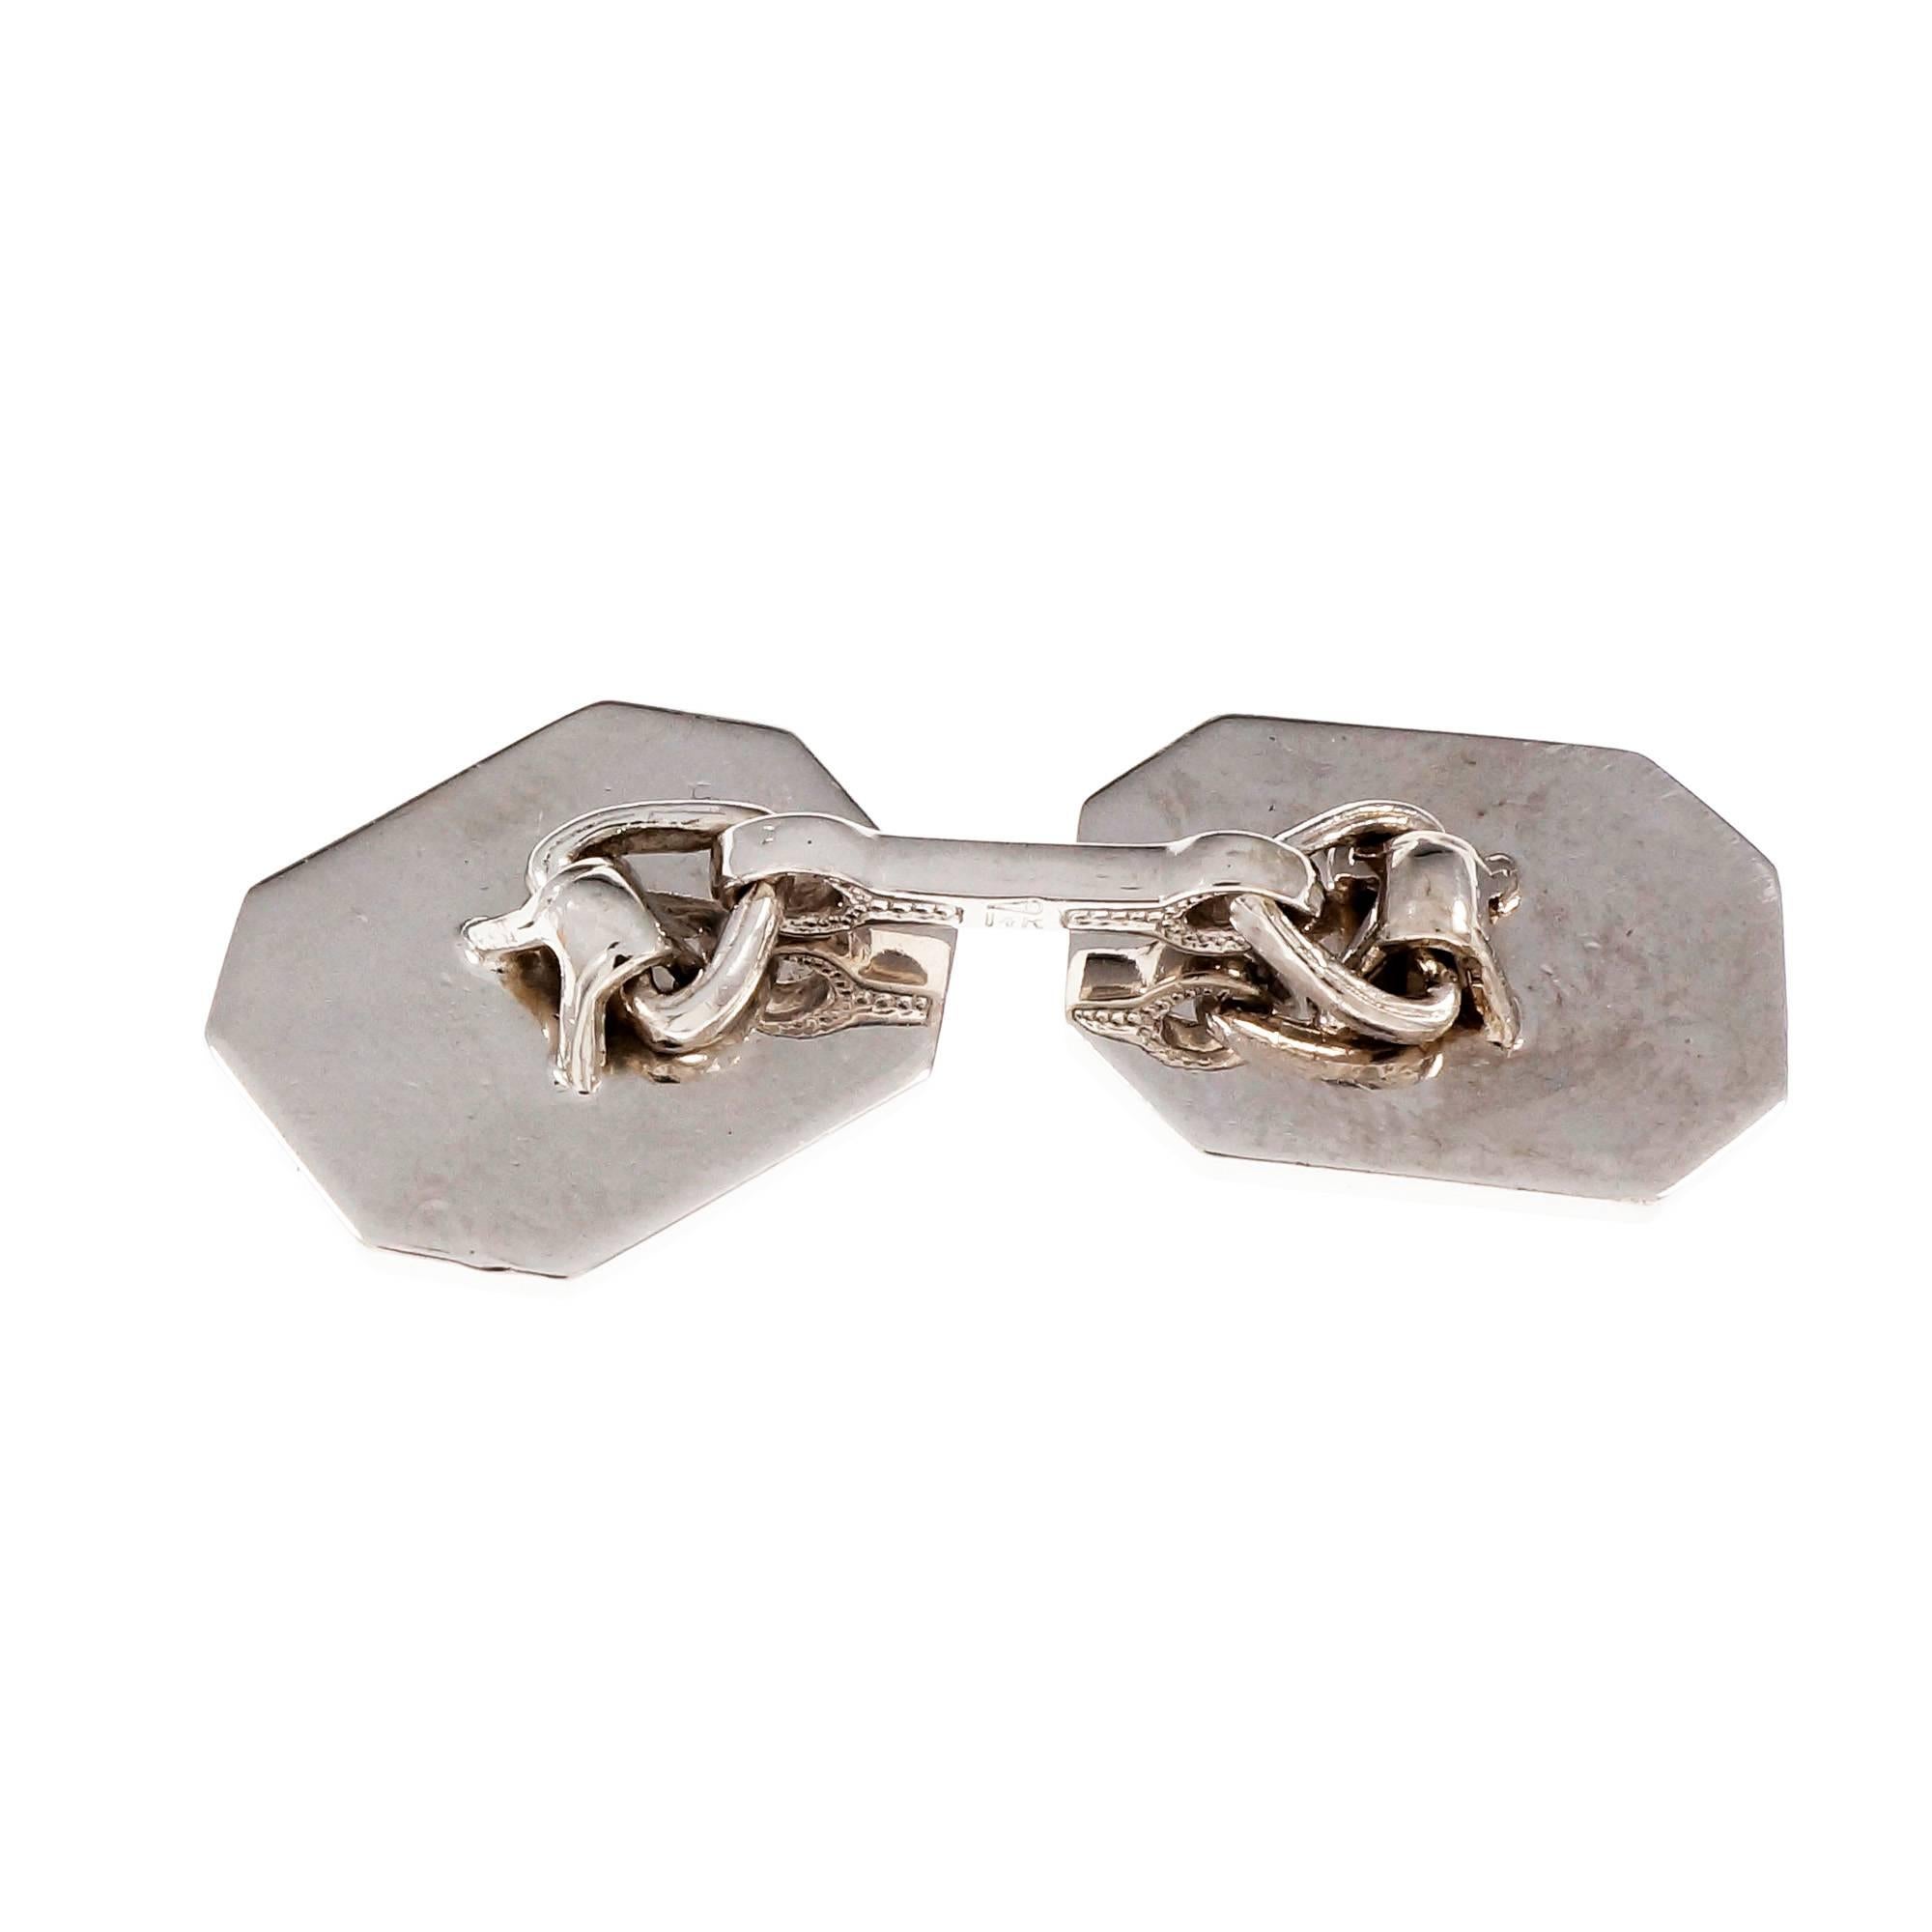 Vintage 1940 octagonal double sided rare 14k white gold cuff links.

14k white gold
Tested and stamped: 14k
14.2 grams
Top to bottom: 12.11mm or .47 inch
Width: 15.53mm or .61 inch
Depth: 1.53mm

